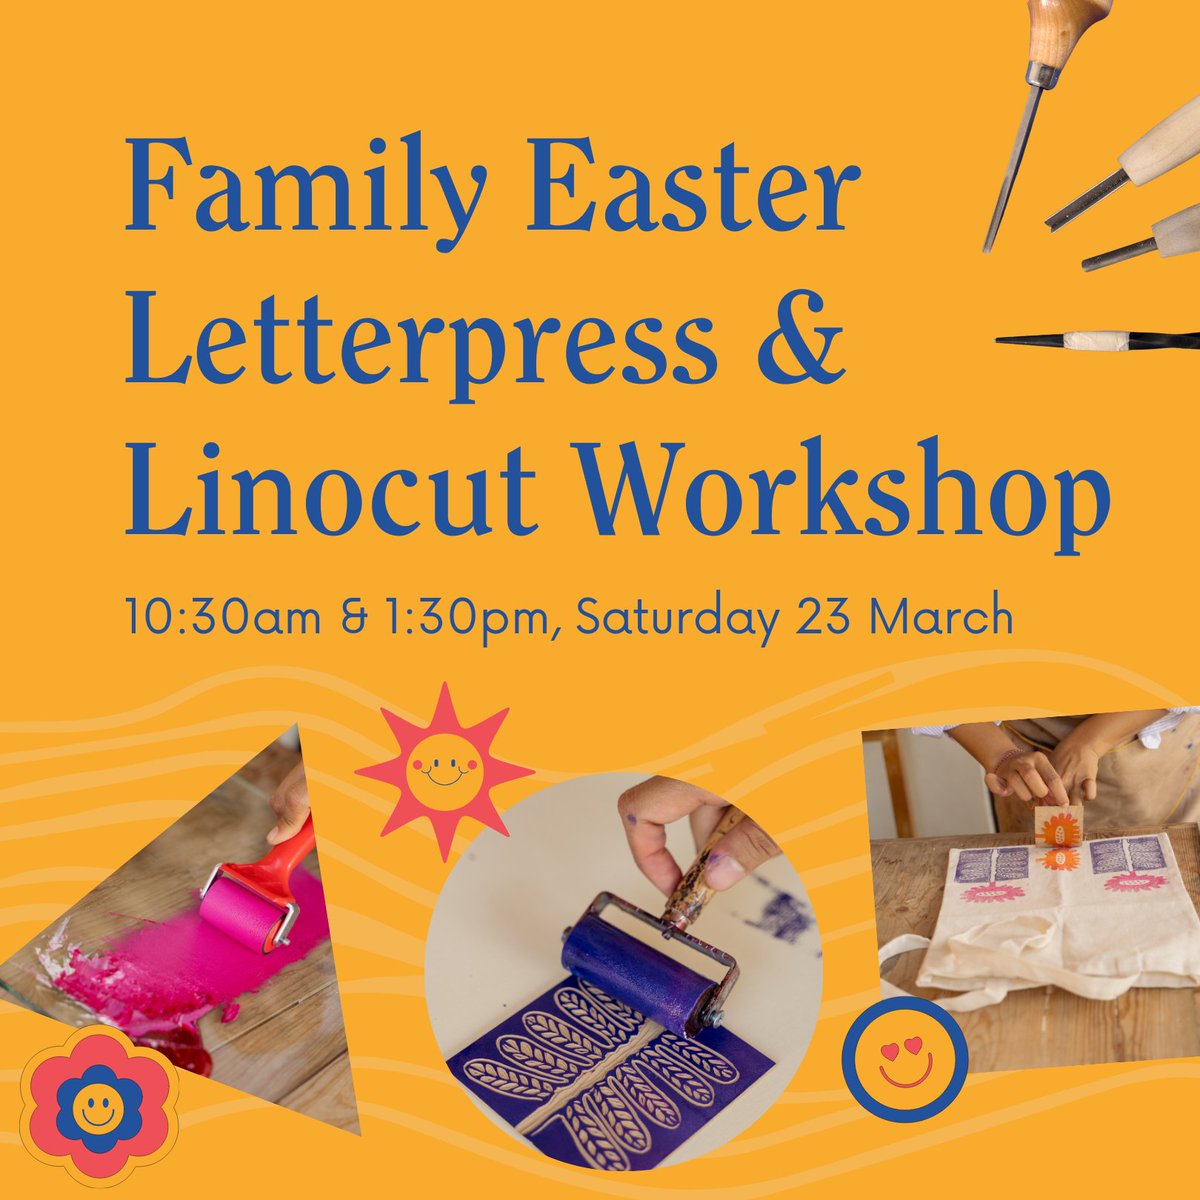 Join artist Suzanne Pinder for a fun, family-friendly tote bag printing workshop. We'll use antique wooden letterpress, fabric ink and pre-made blocks. You can also carve your own linocut for a truly unique design. 🎟️£2.50. Suitable for ages 8-12 yrs. …ter-letterpress-lino.eventbrite.co.uk